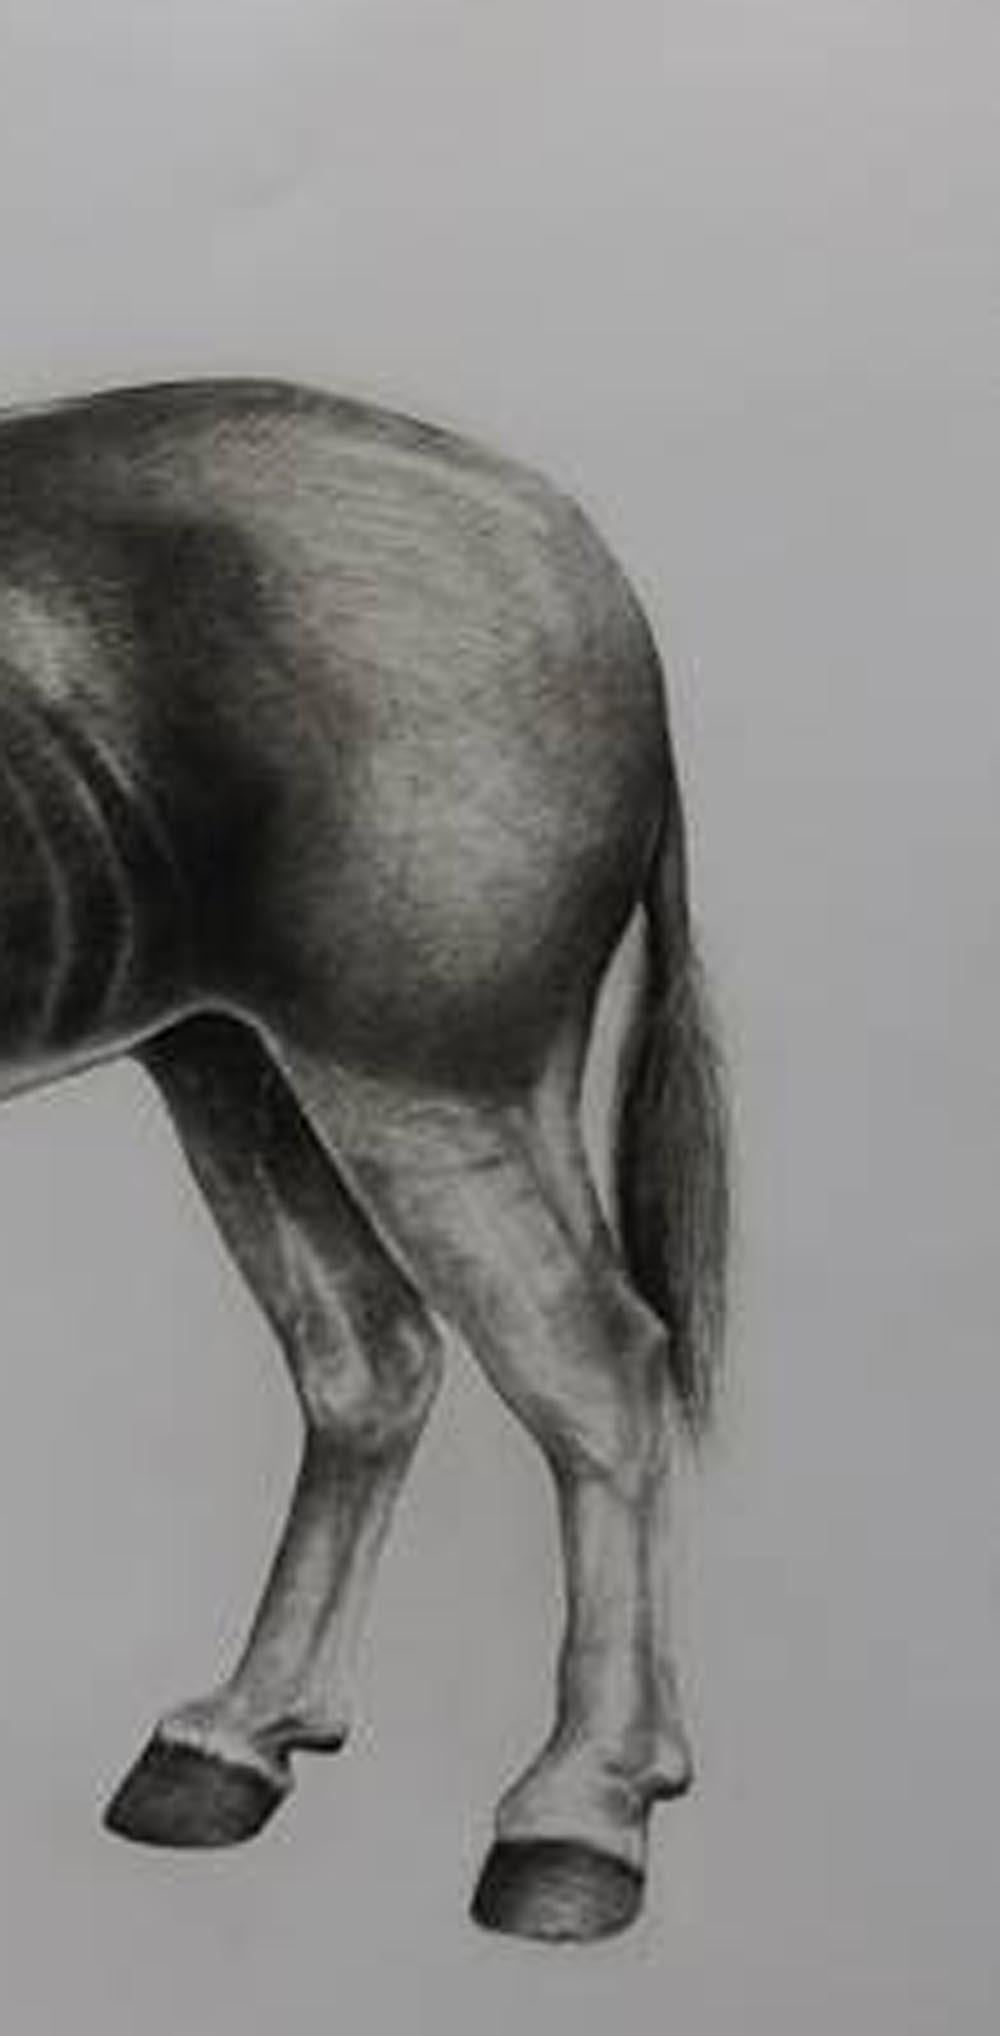 ‘Quagga’ by Tammy Mackay is a Limited Edition photopolymer print on Somerset paper and is an edition of 40.
Tammy Mackay works are available to buy with Wychwood art online and in our art gallery. Tammy Mackay's Dodo work and other works are